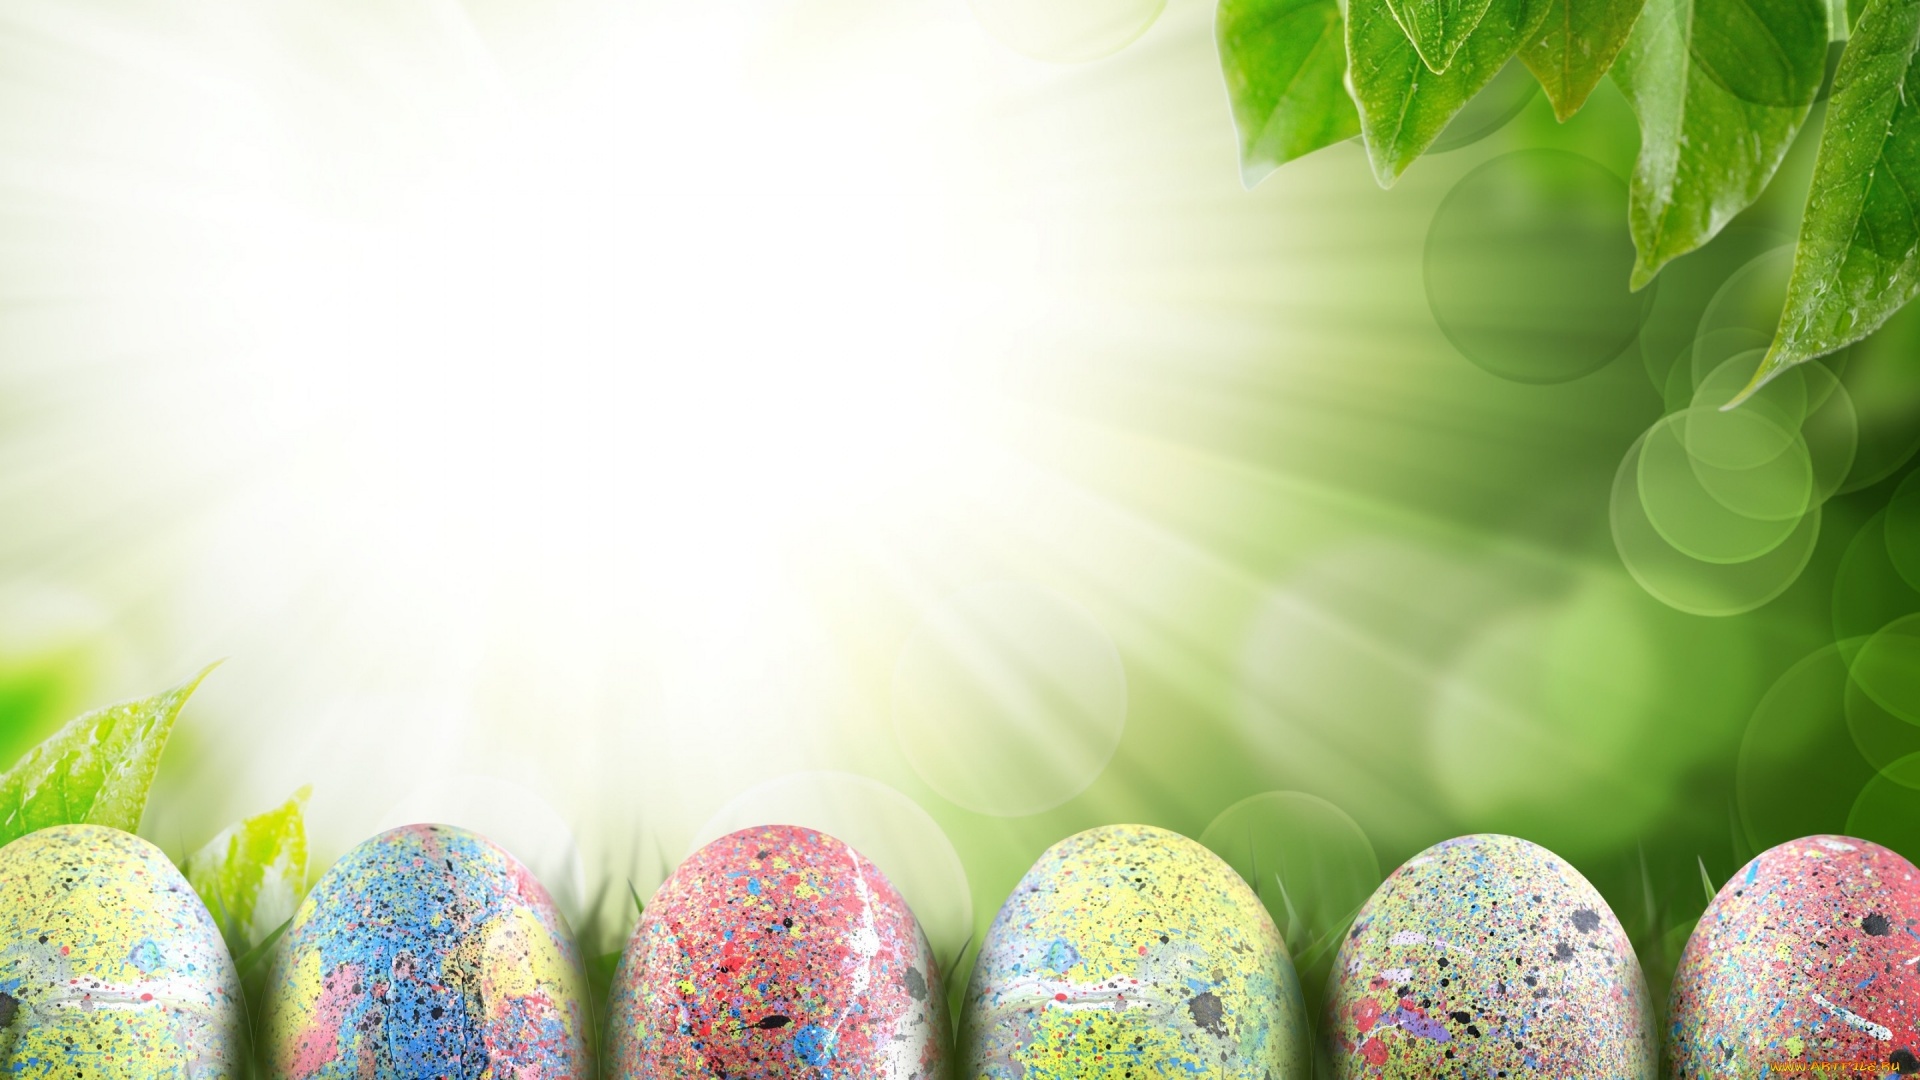 Background For Easter Card Image